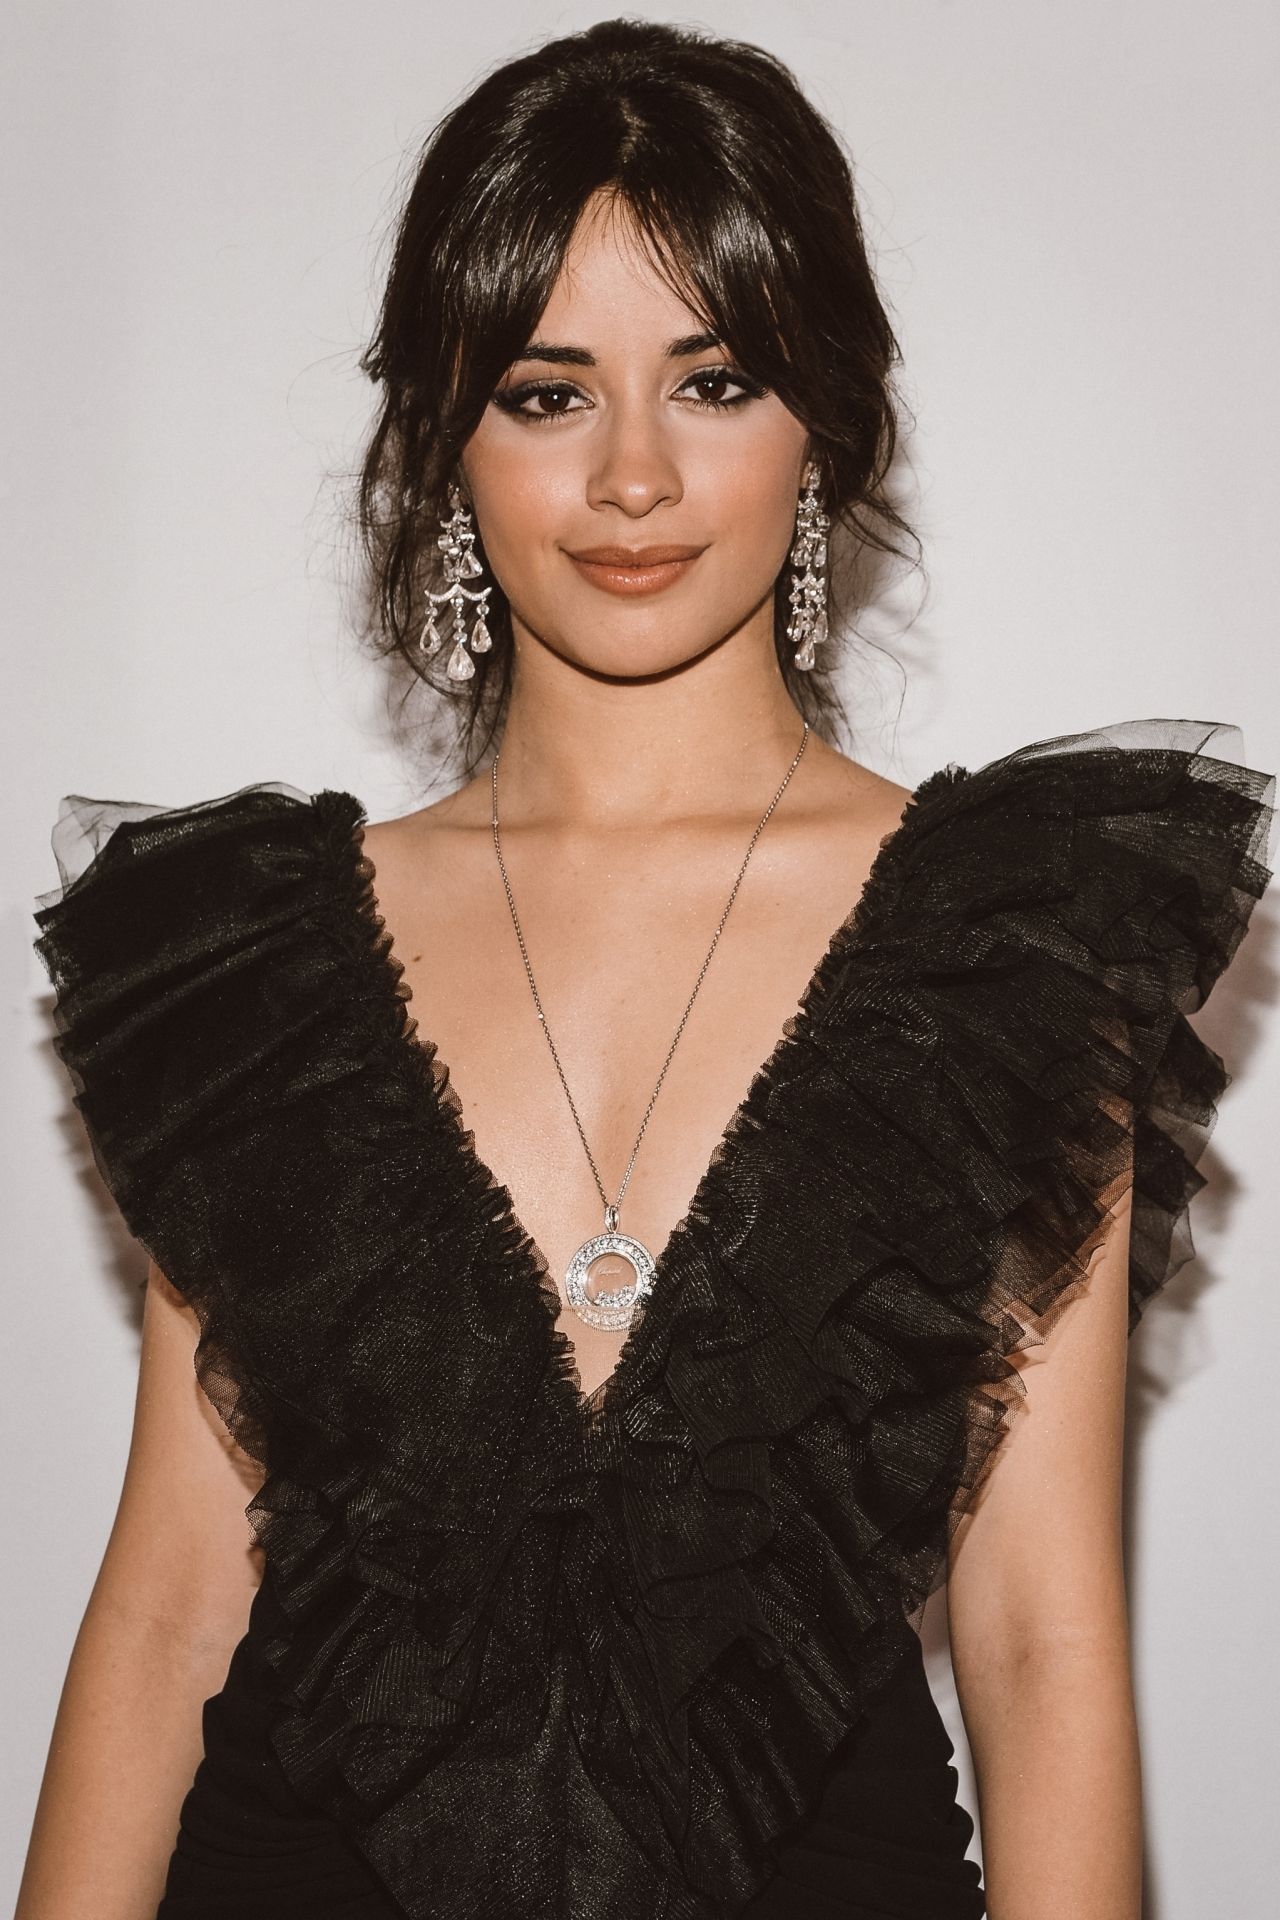 Camila Cabello - Clive Davis and Recording Academy Pre-GRAMMY Photoshooot in NYC